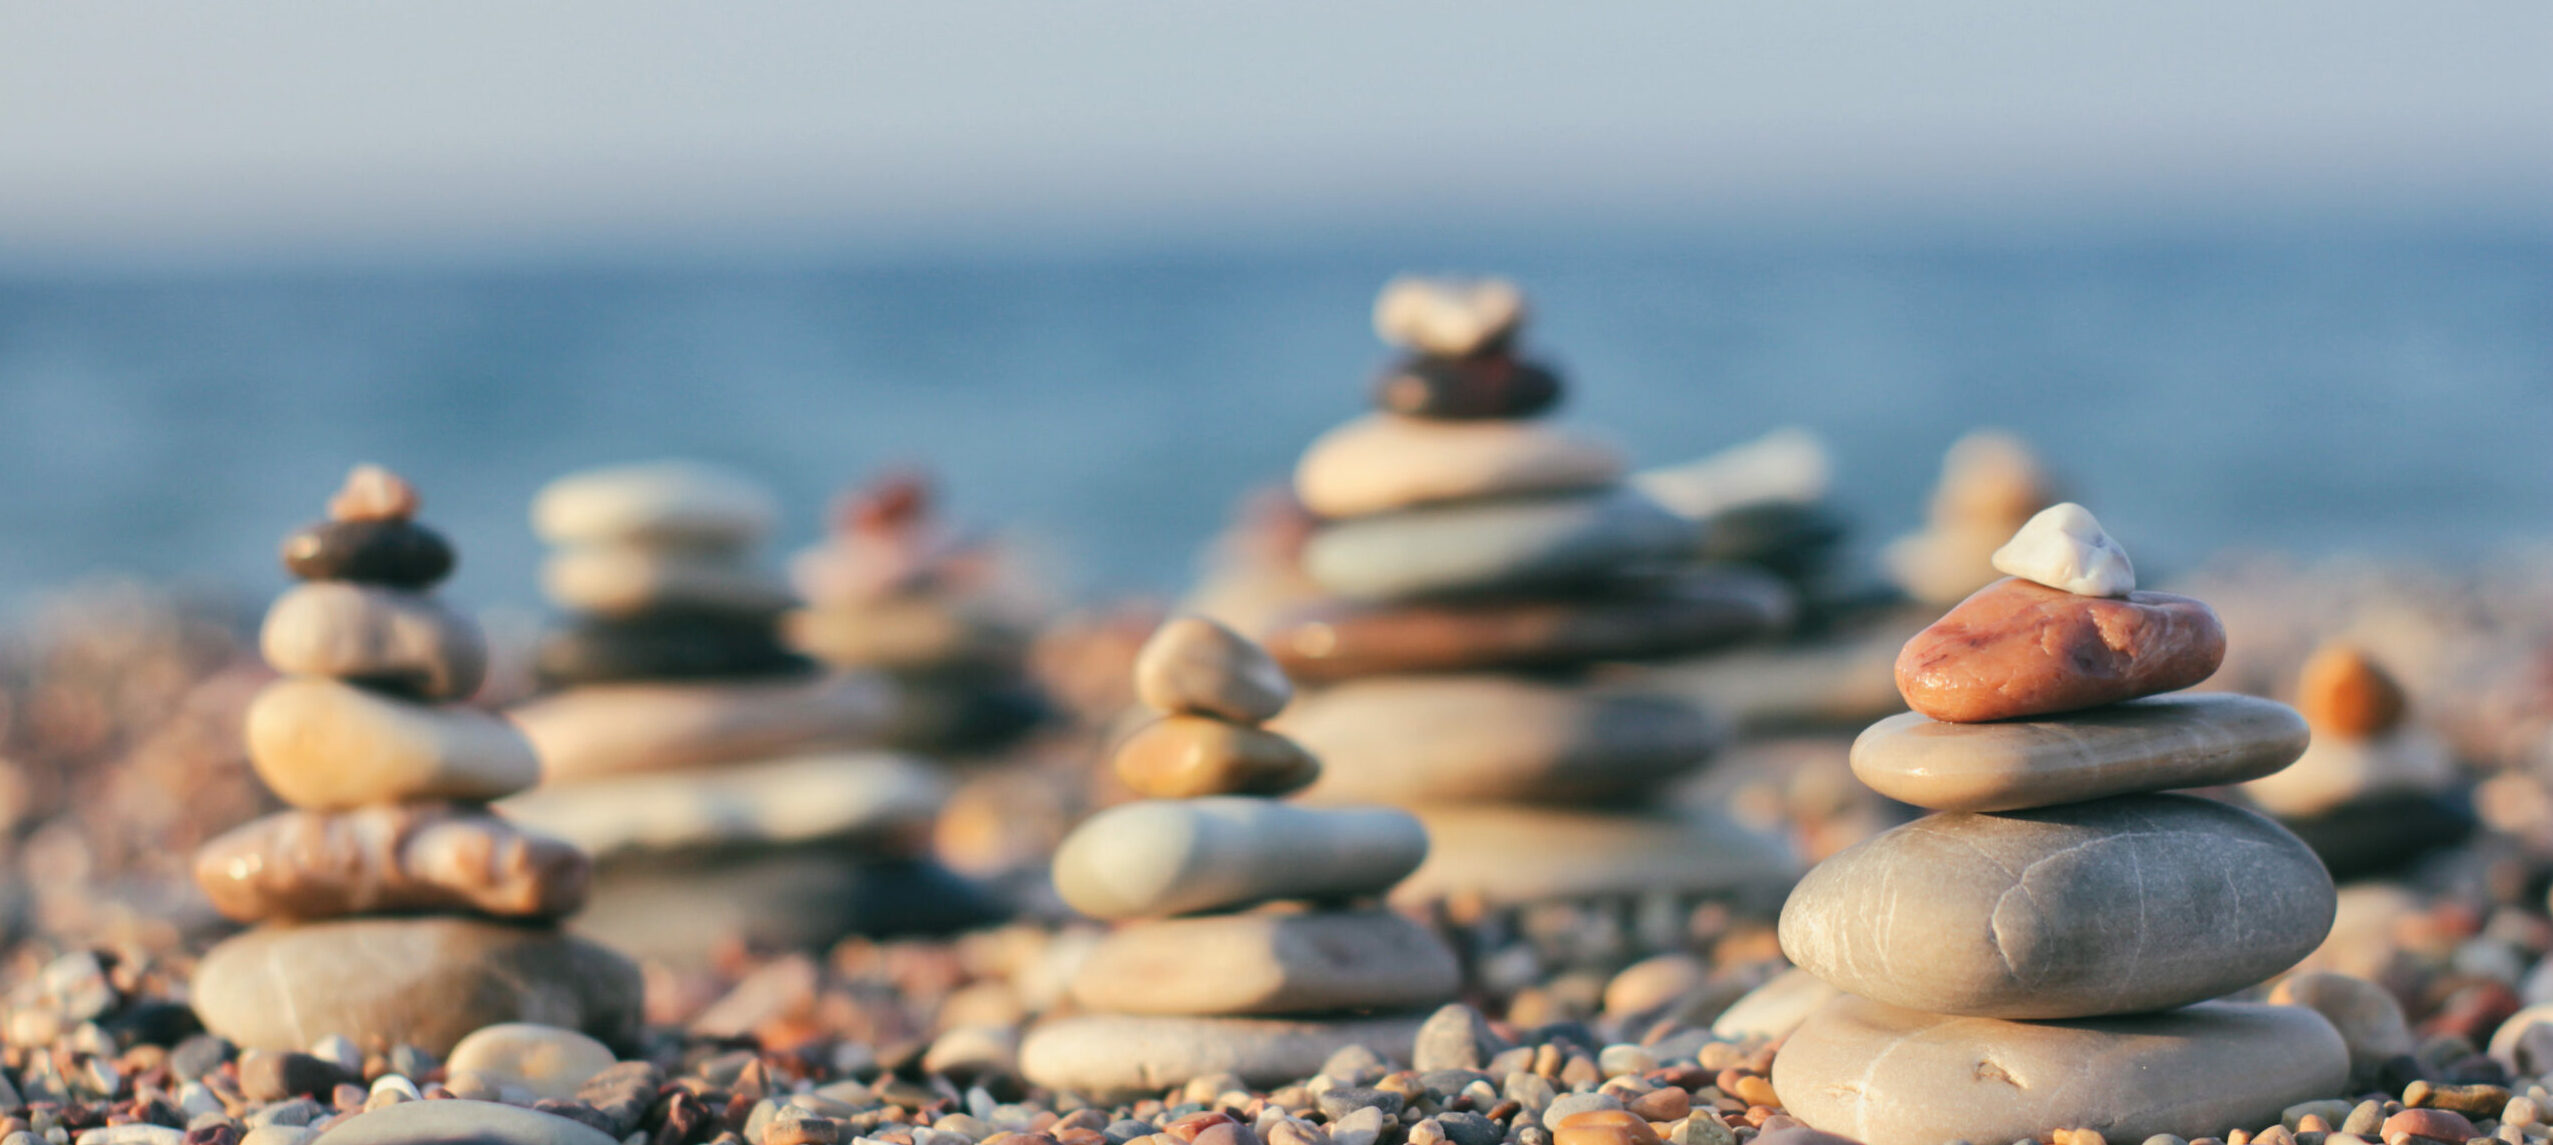 Zen pyramid of spa stones on the blurred sea background. Sand on